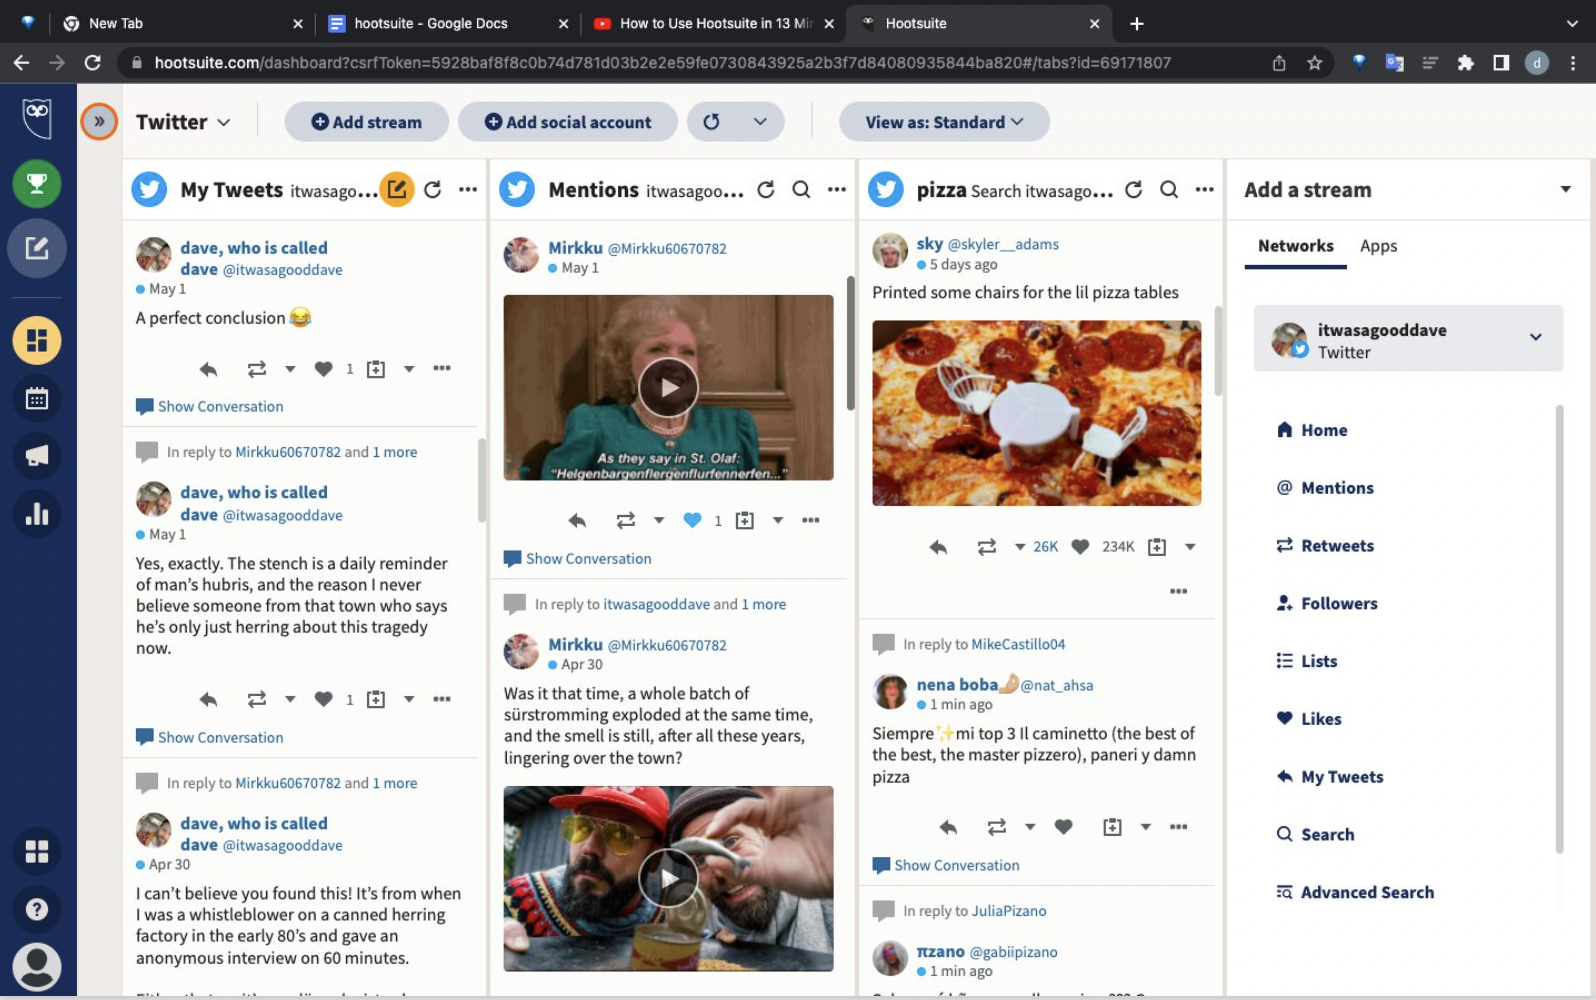 example of how Hootsuite centralizes social media content